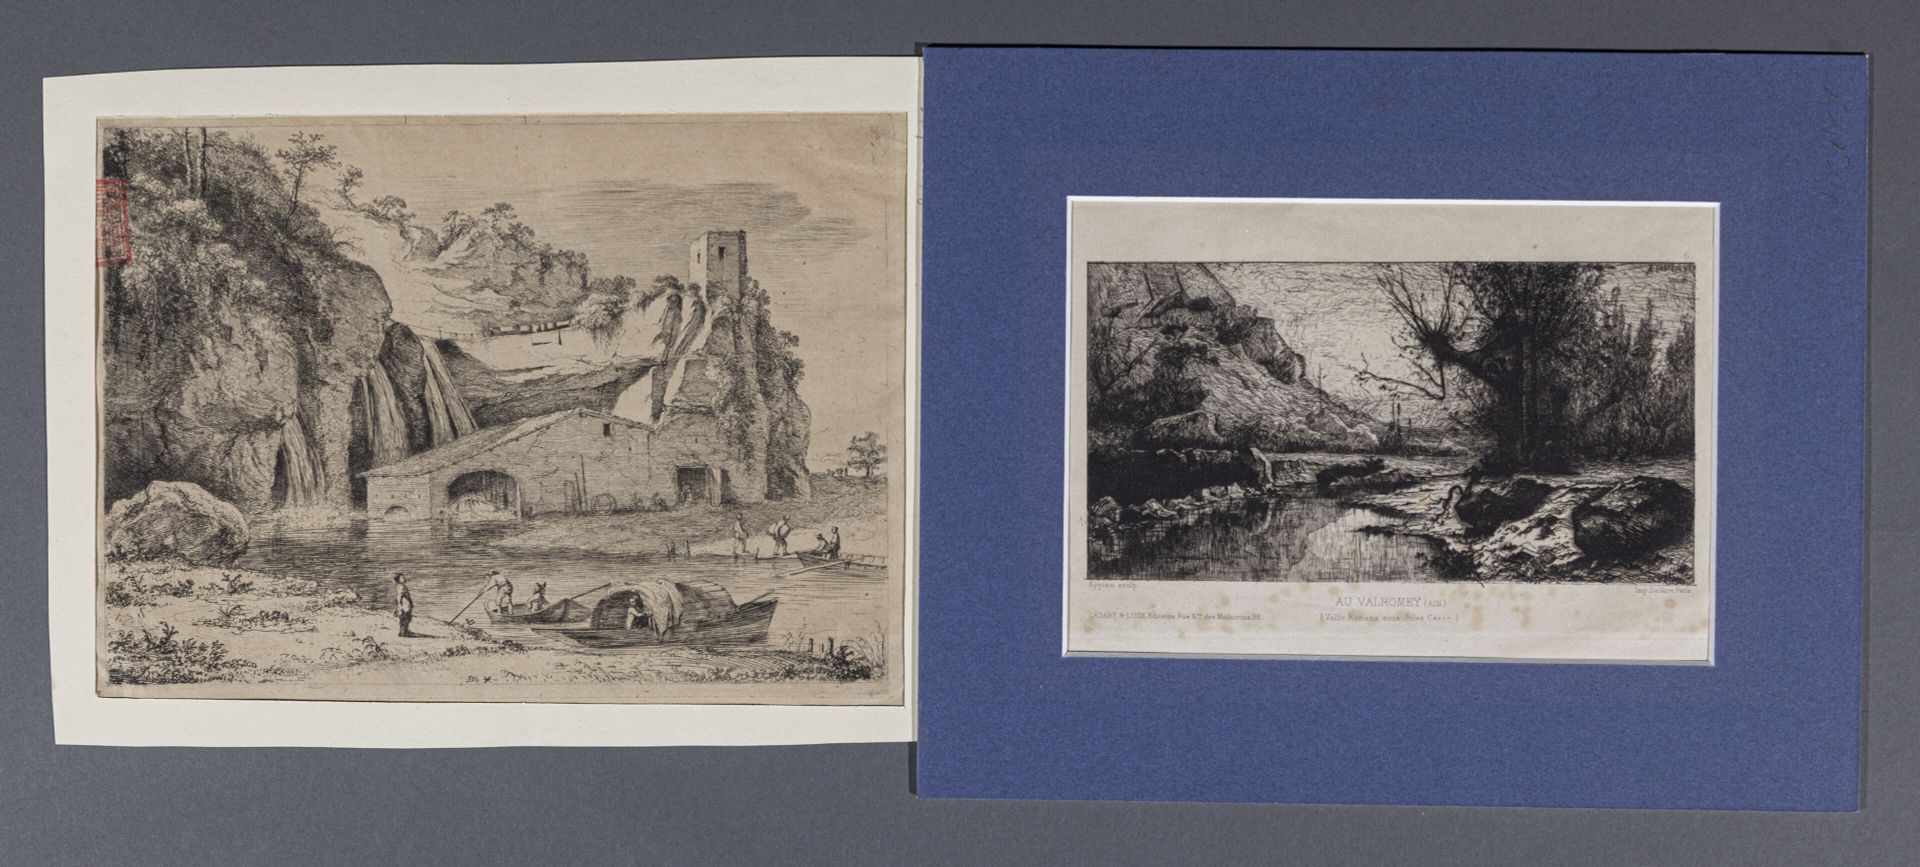 Null Jean-Jacques de Boissieu

The mill of Italy

Etching on China paper

H. 20,&hellip;